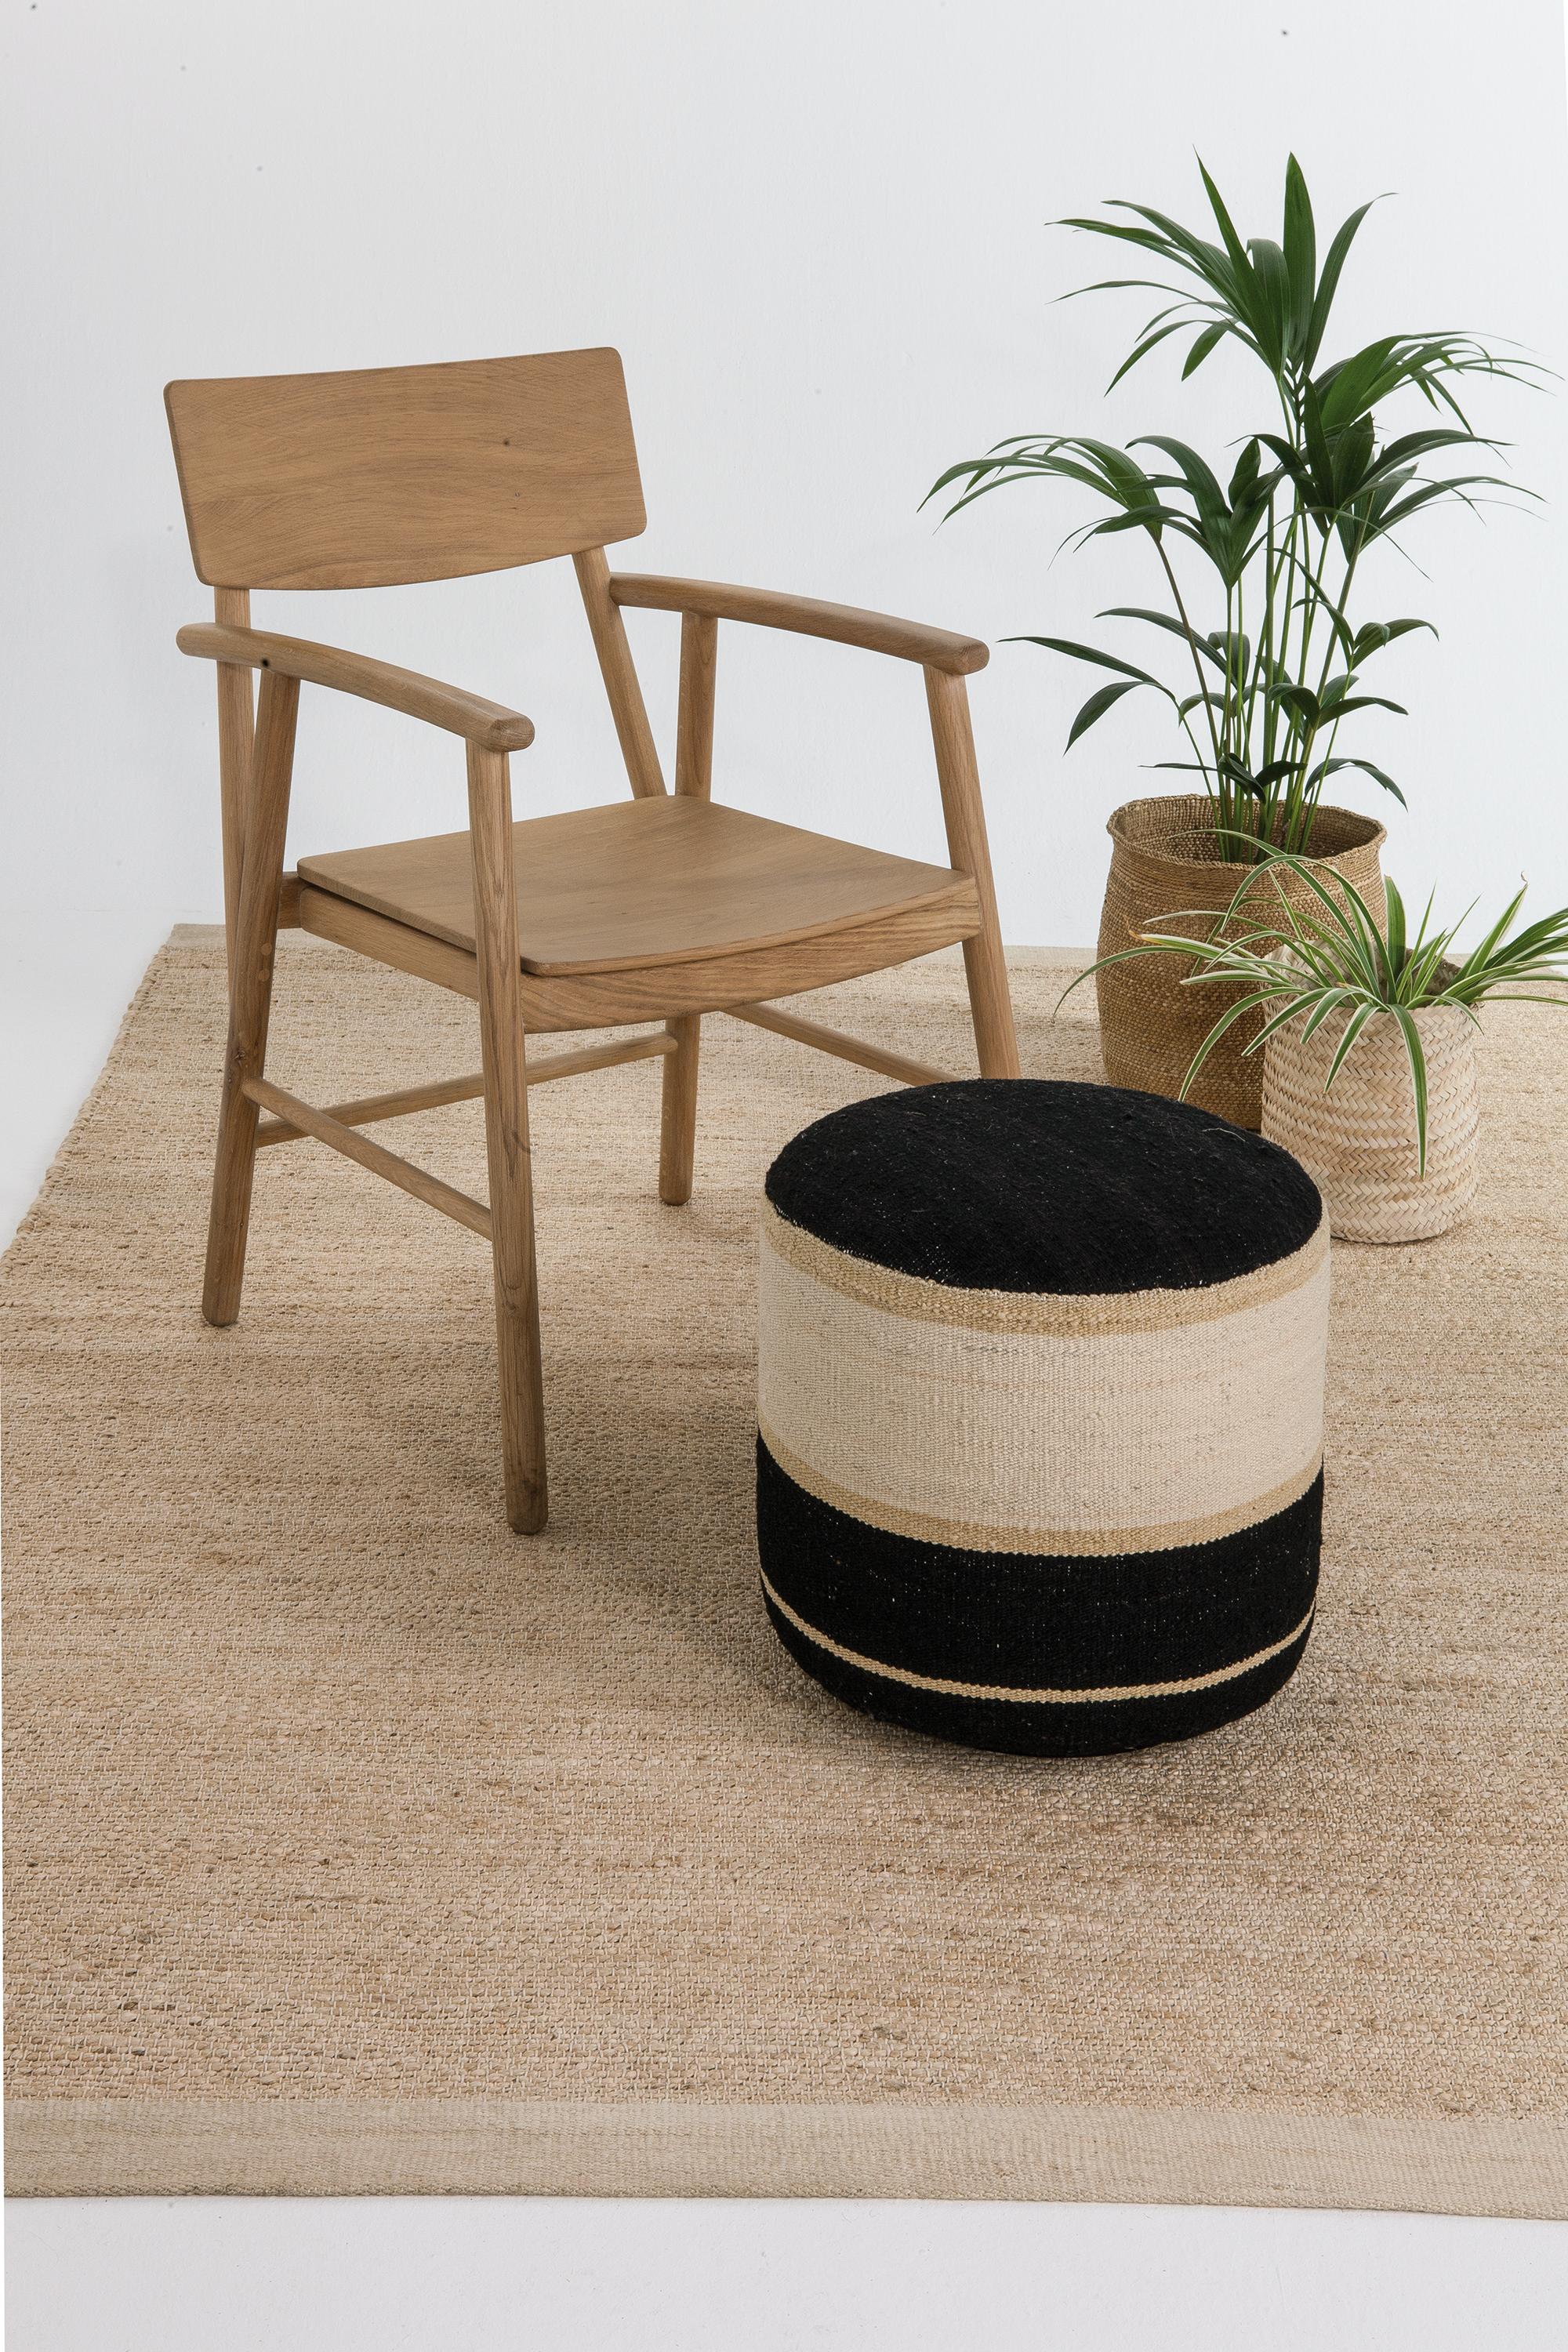 'Kilim 2' Pouf by Nani Marquina and Marcos Catalán for Nanimarquina In New Condition For Sale In Glendale, CA